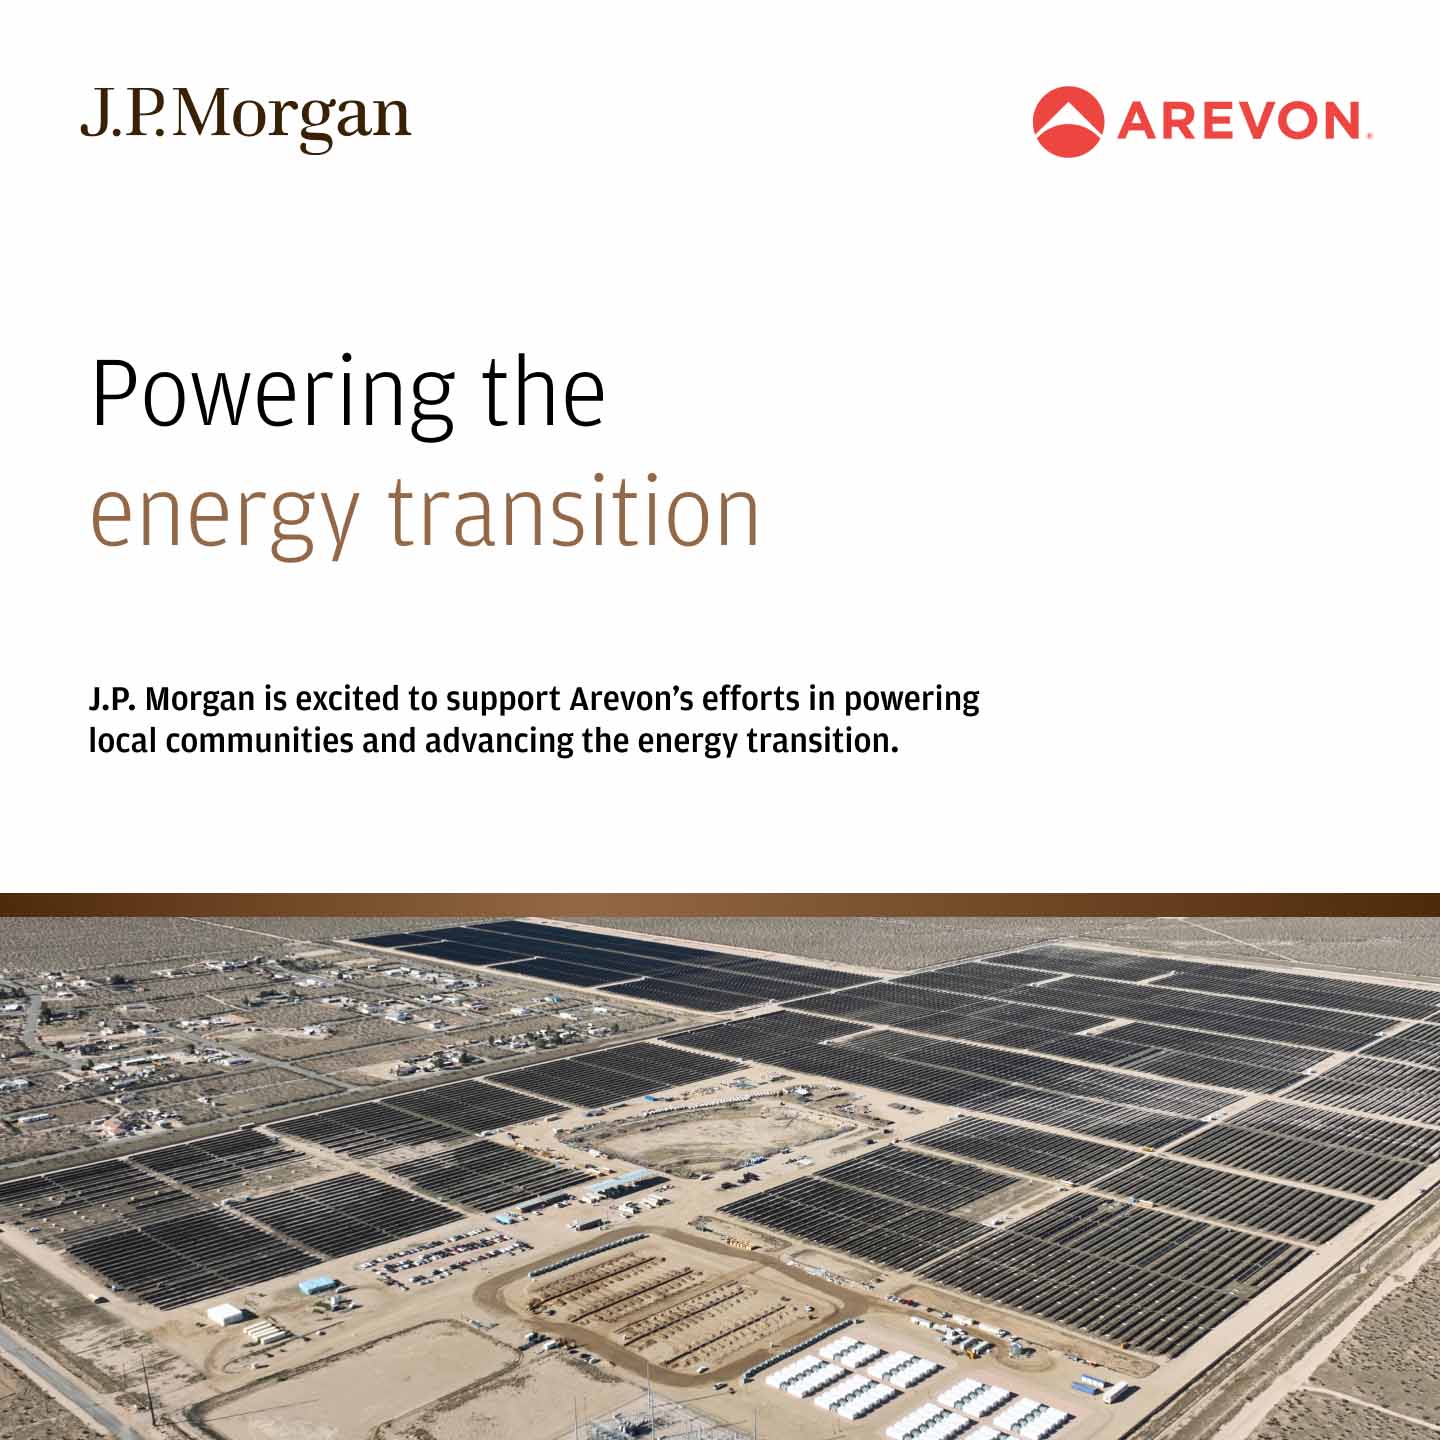 Powering the energy transition